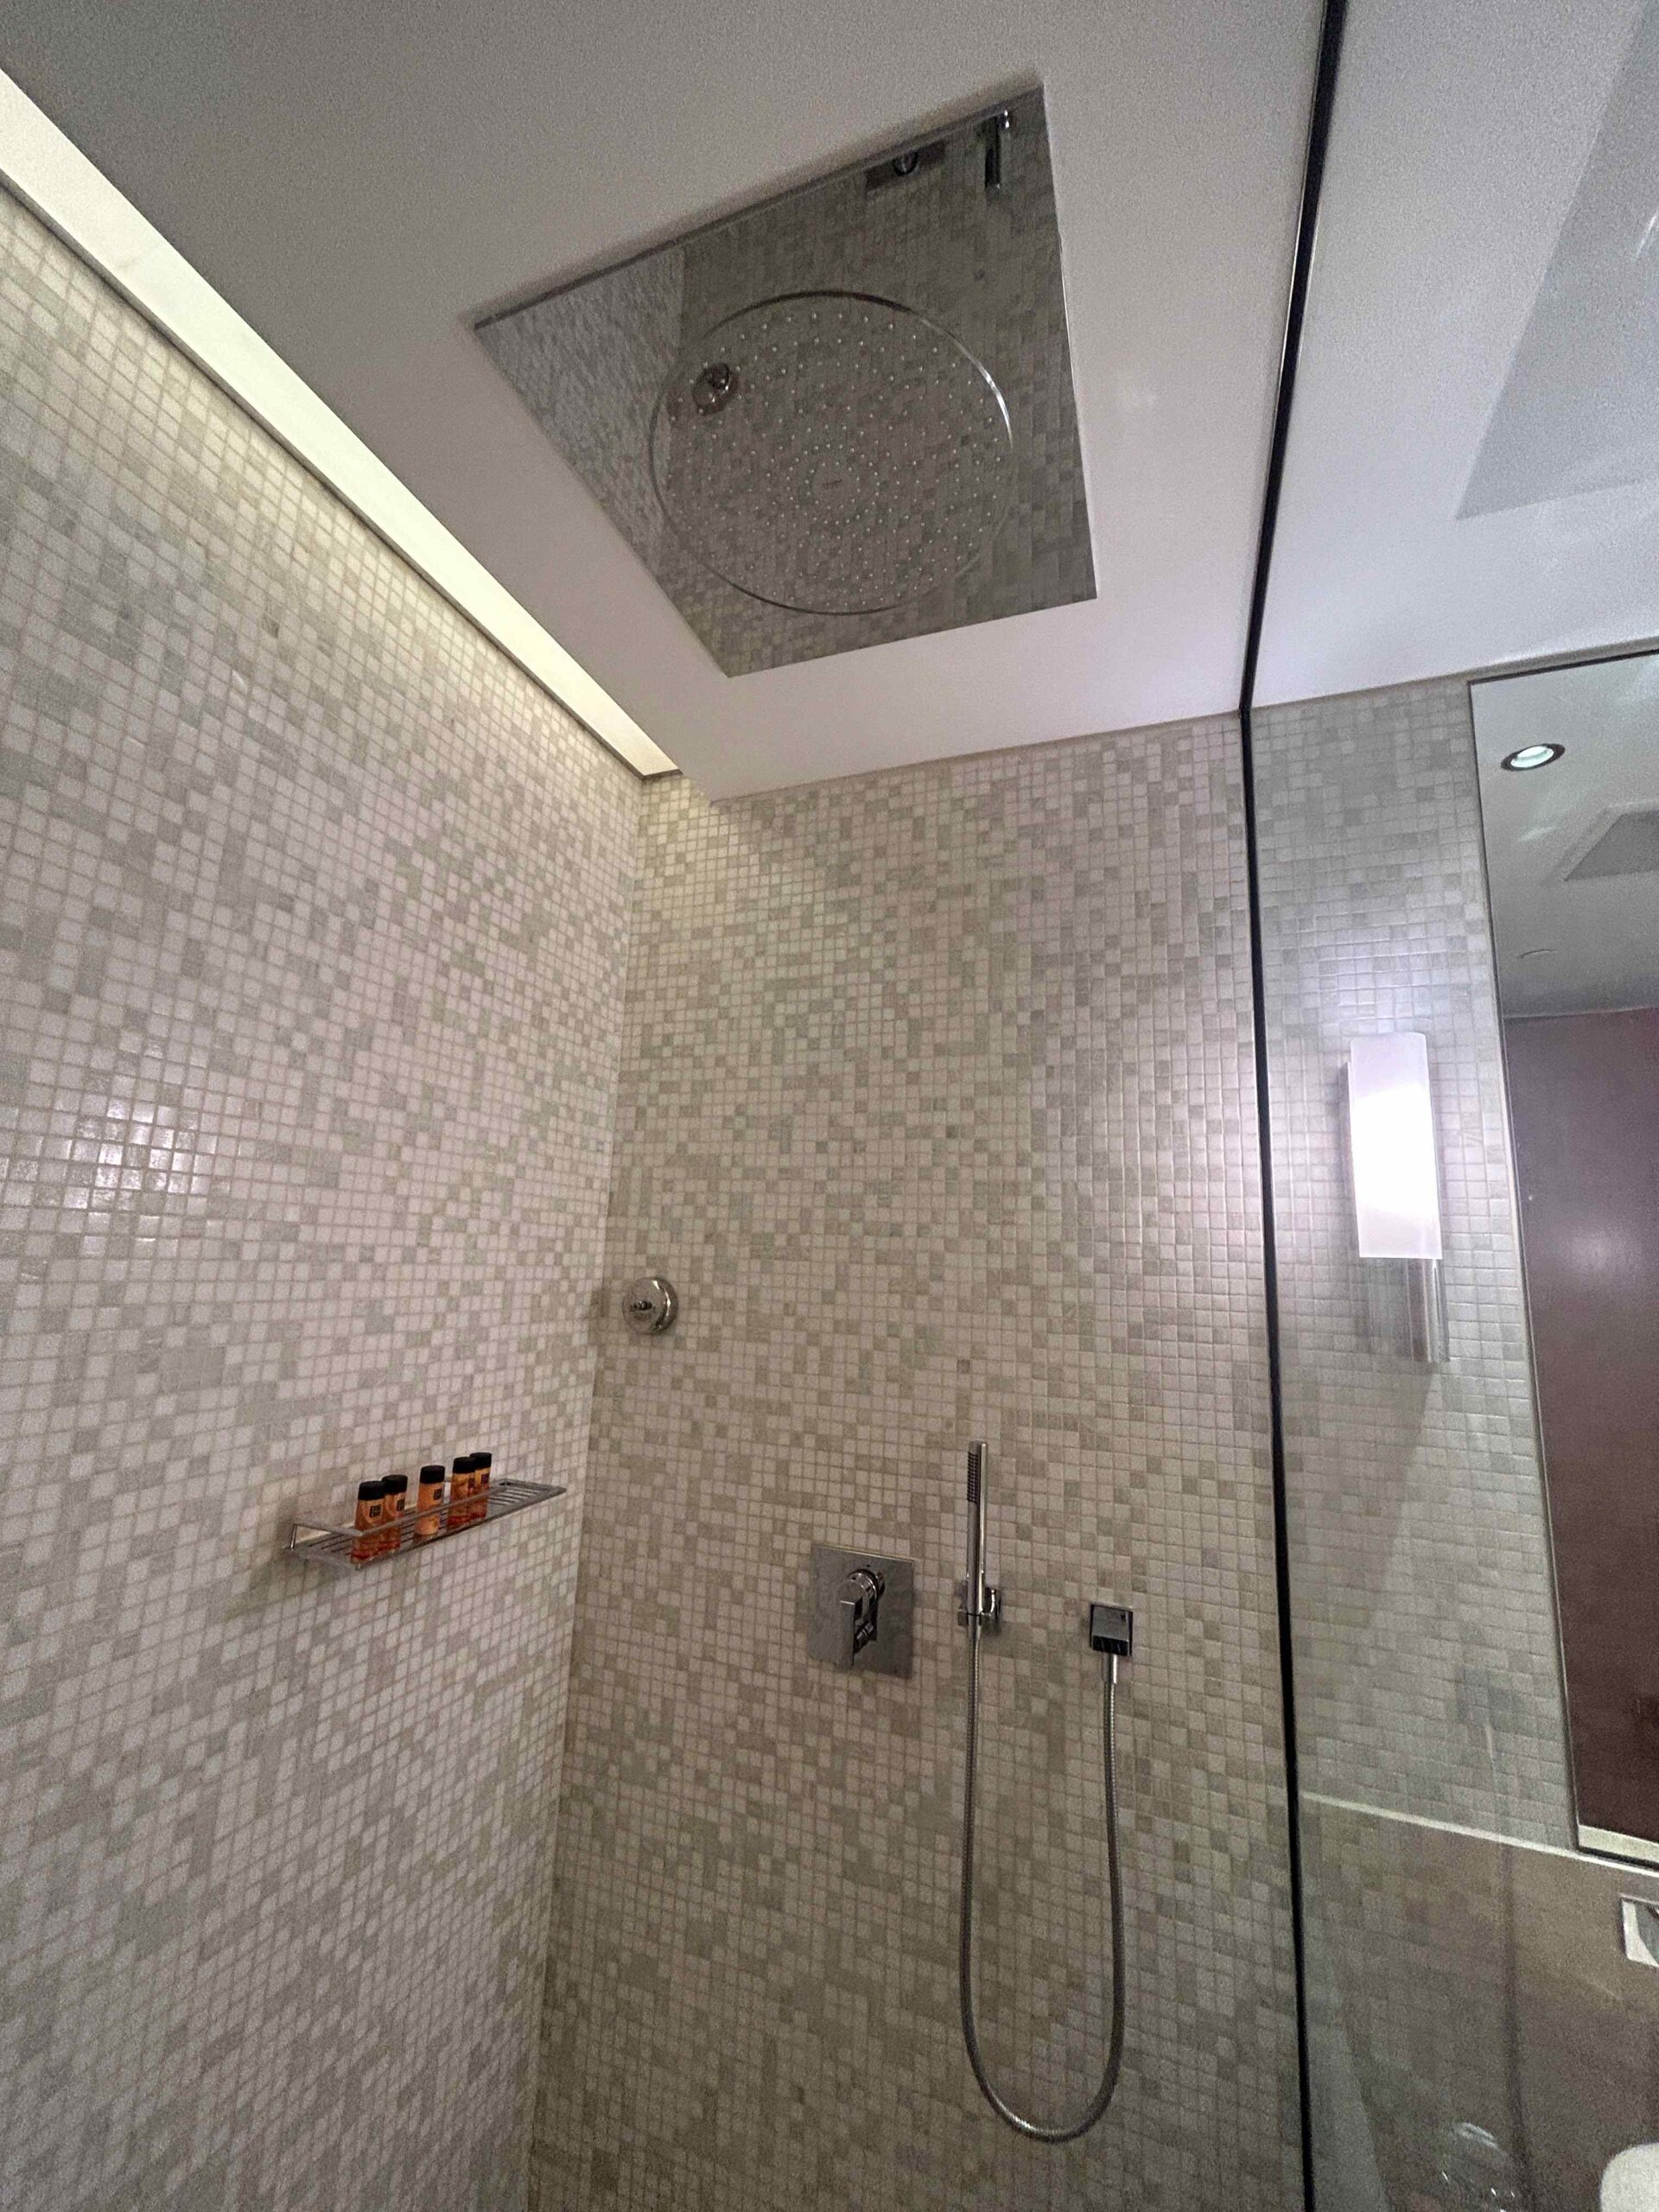 A view of Doha transit hotel Bathroom Shower Area